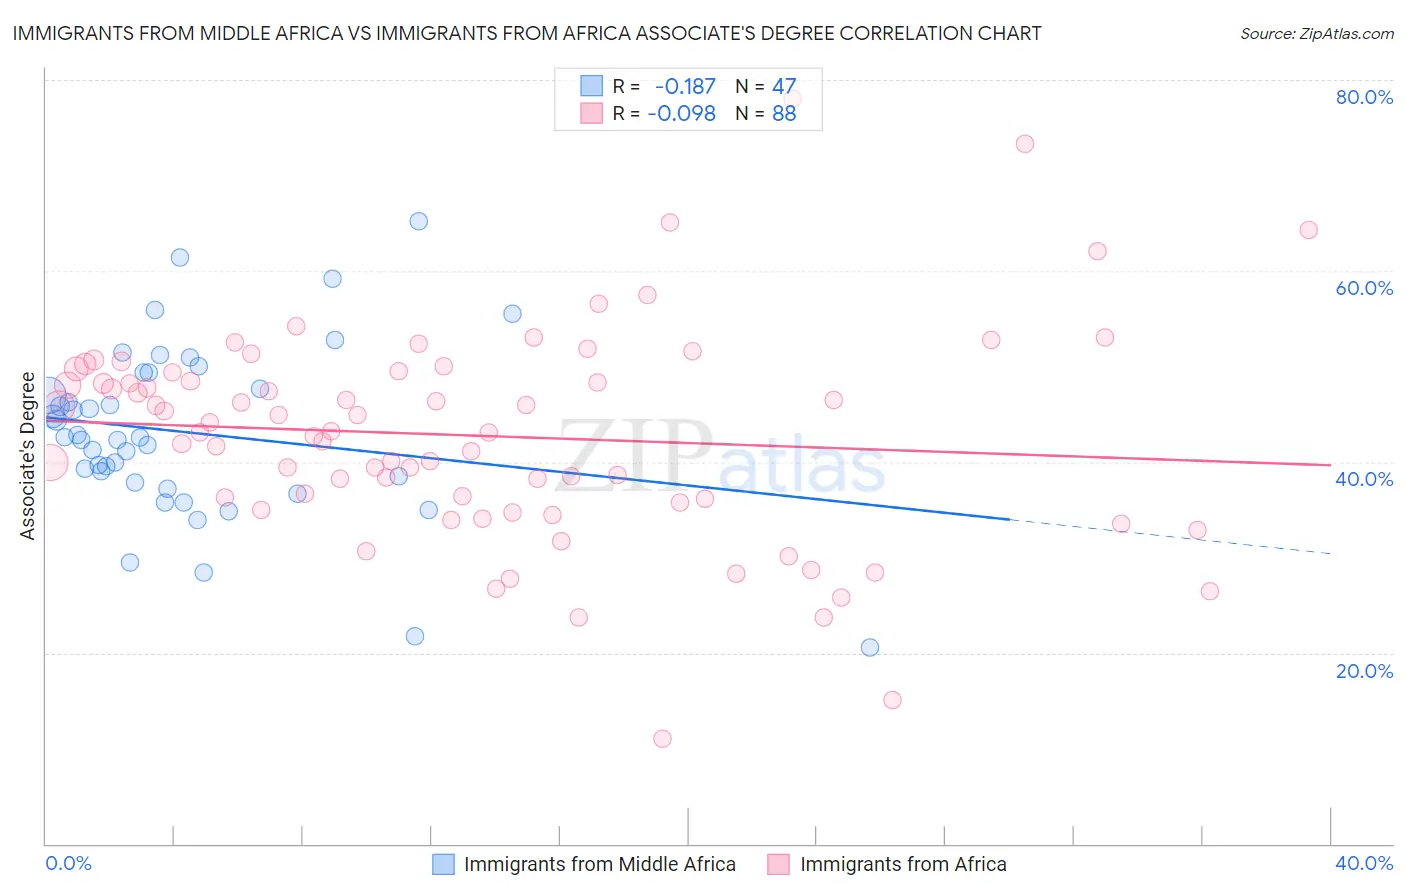 Immigrants from Middle Africa vs Immigrants from Africa Associate's Degree